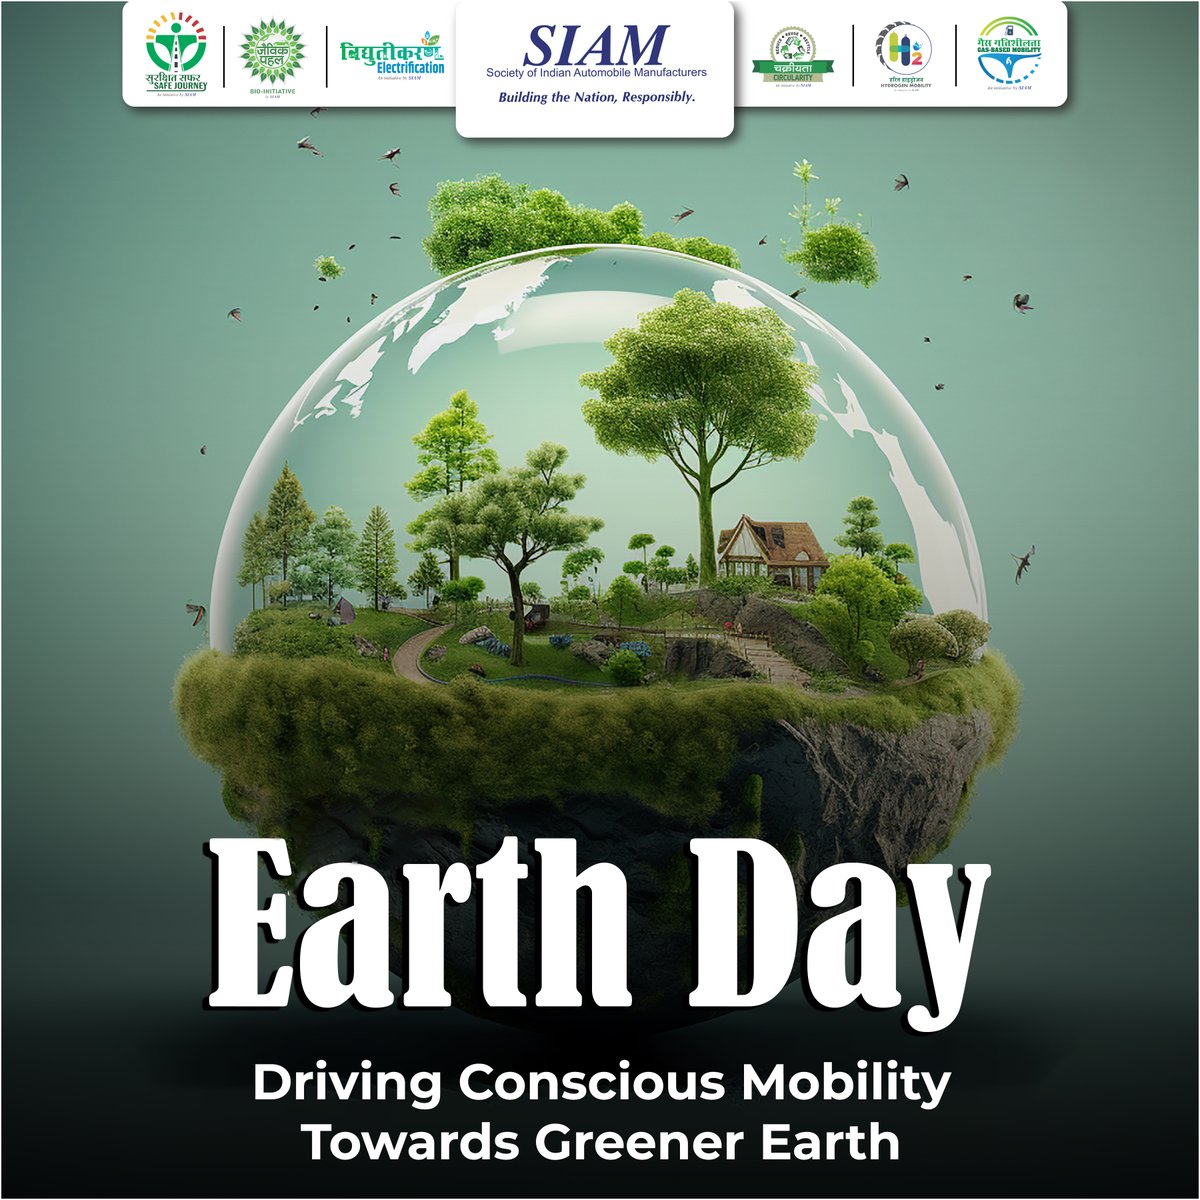 Celebrating a commitment toward greener and cleaner mobility. #BTNR #EarthDay